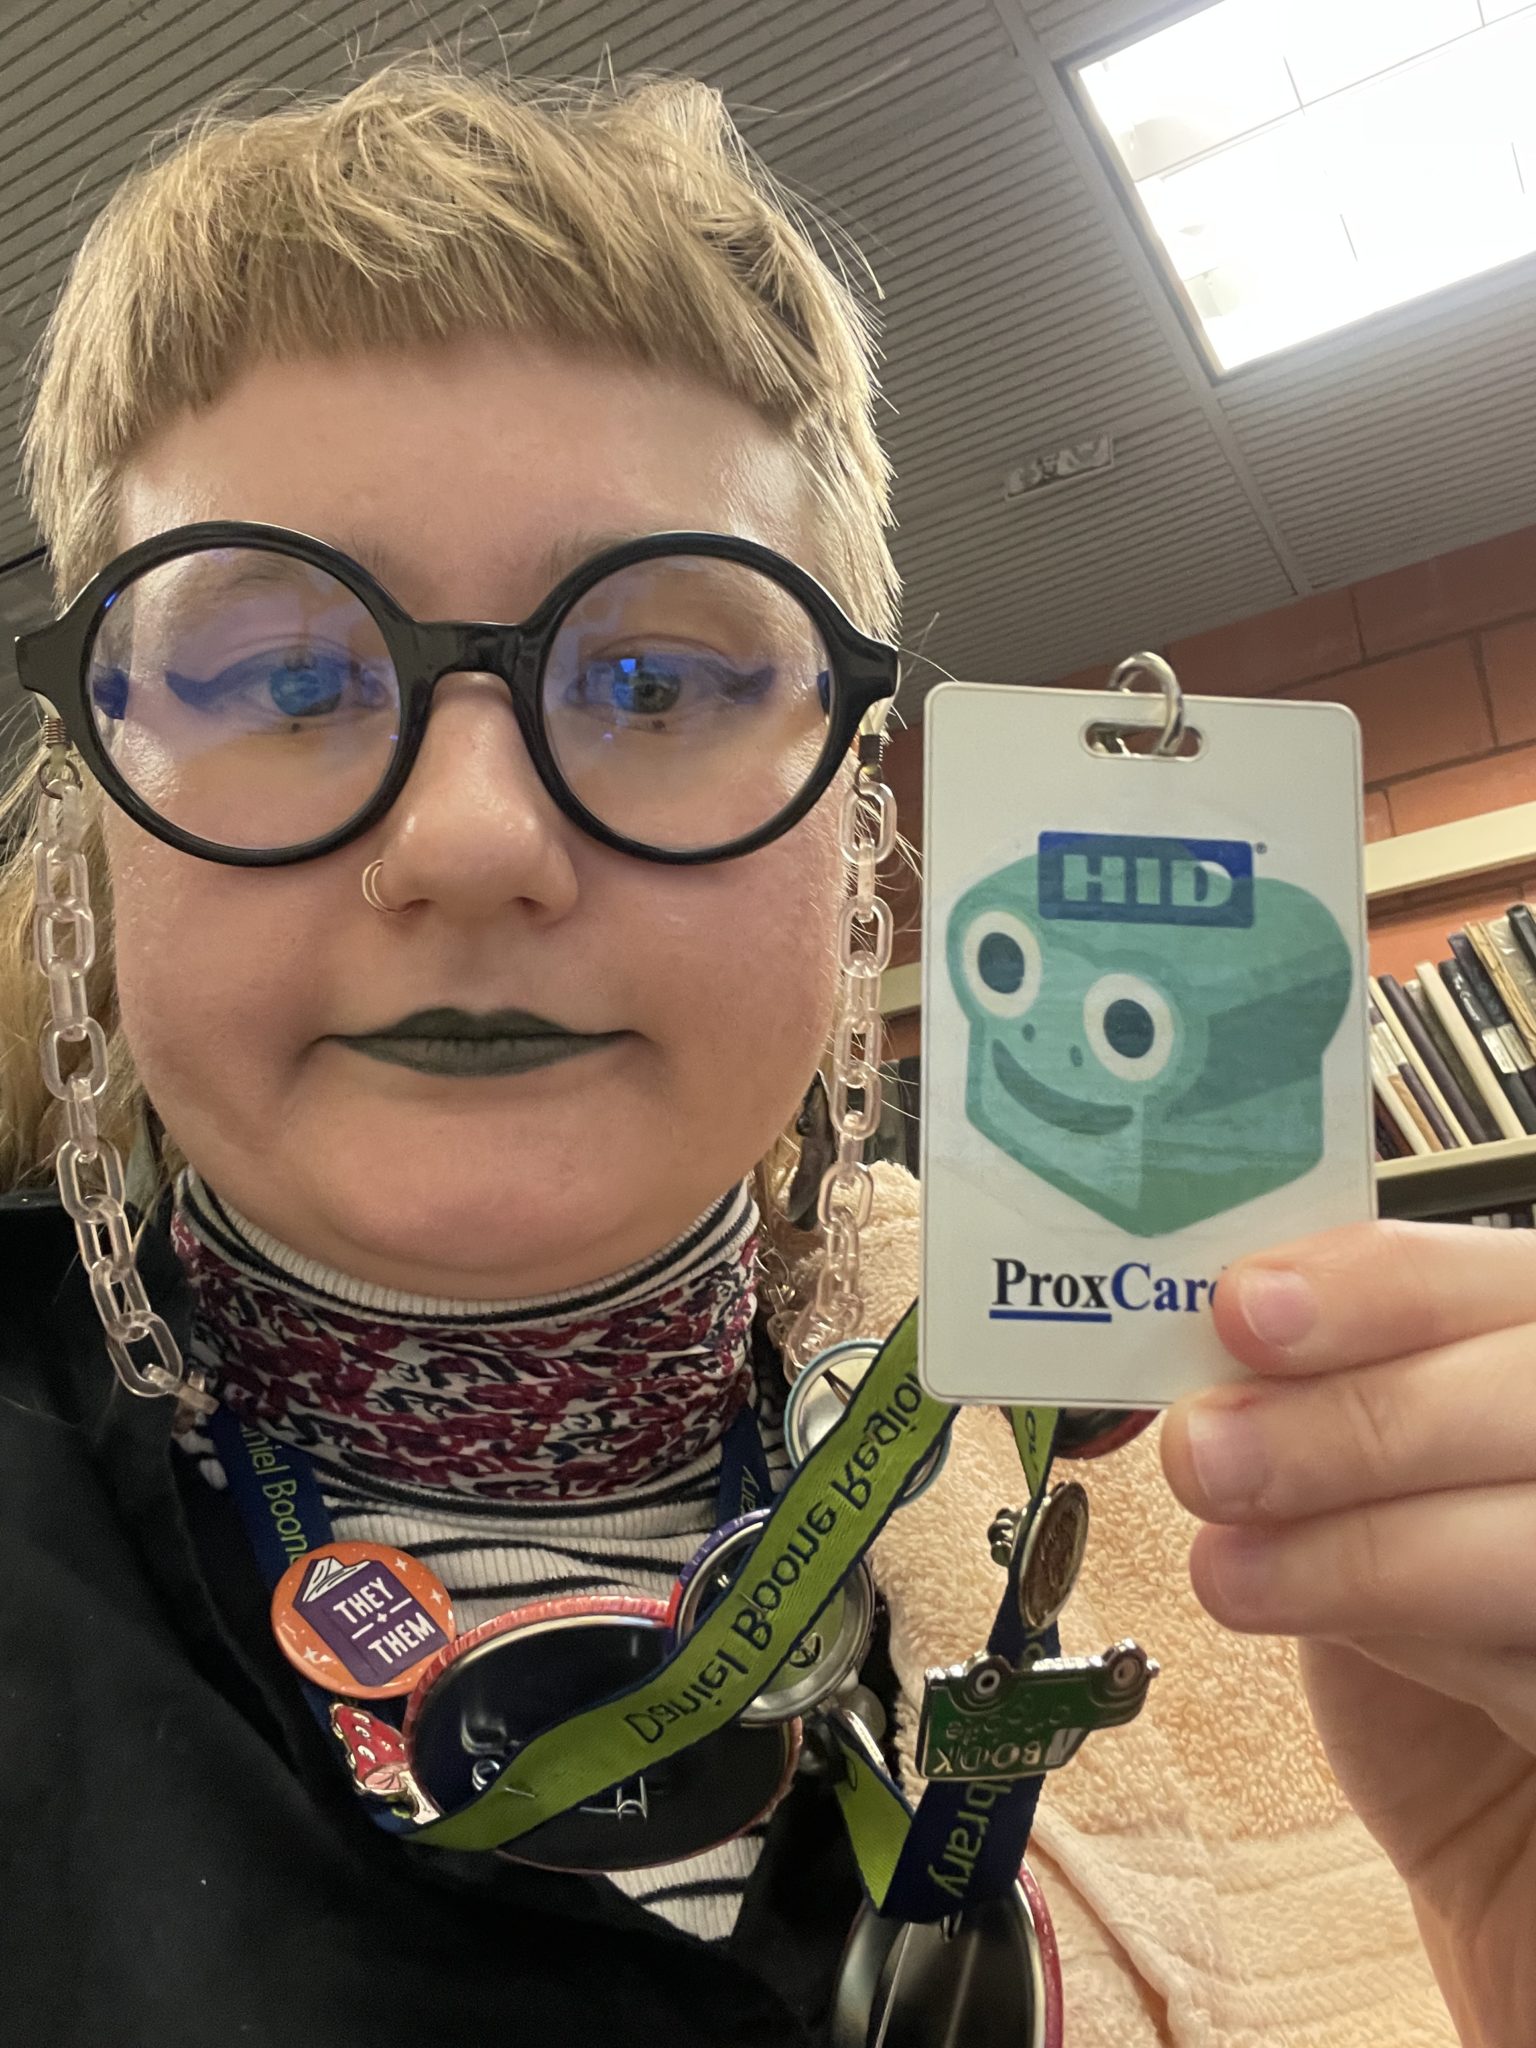 Image of Grae, a white nonbinary person, holding up a library staff keycard to which a packing tape sticker is affixed. The packing tape sticker on their keycard is an emoji fusion of the frog and bread emojis, creating a cute green loaf of bread with a wide-eyed frog's face superimposed on the front of the loaf. 